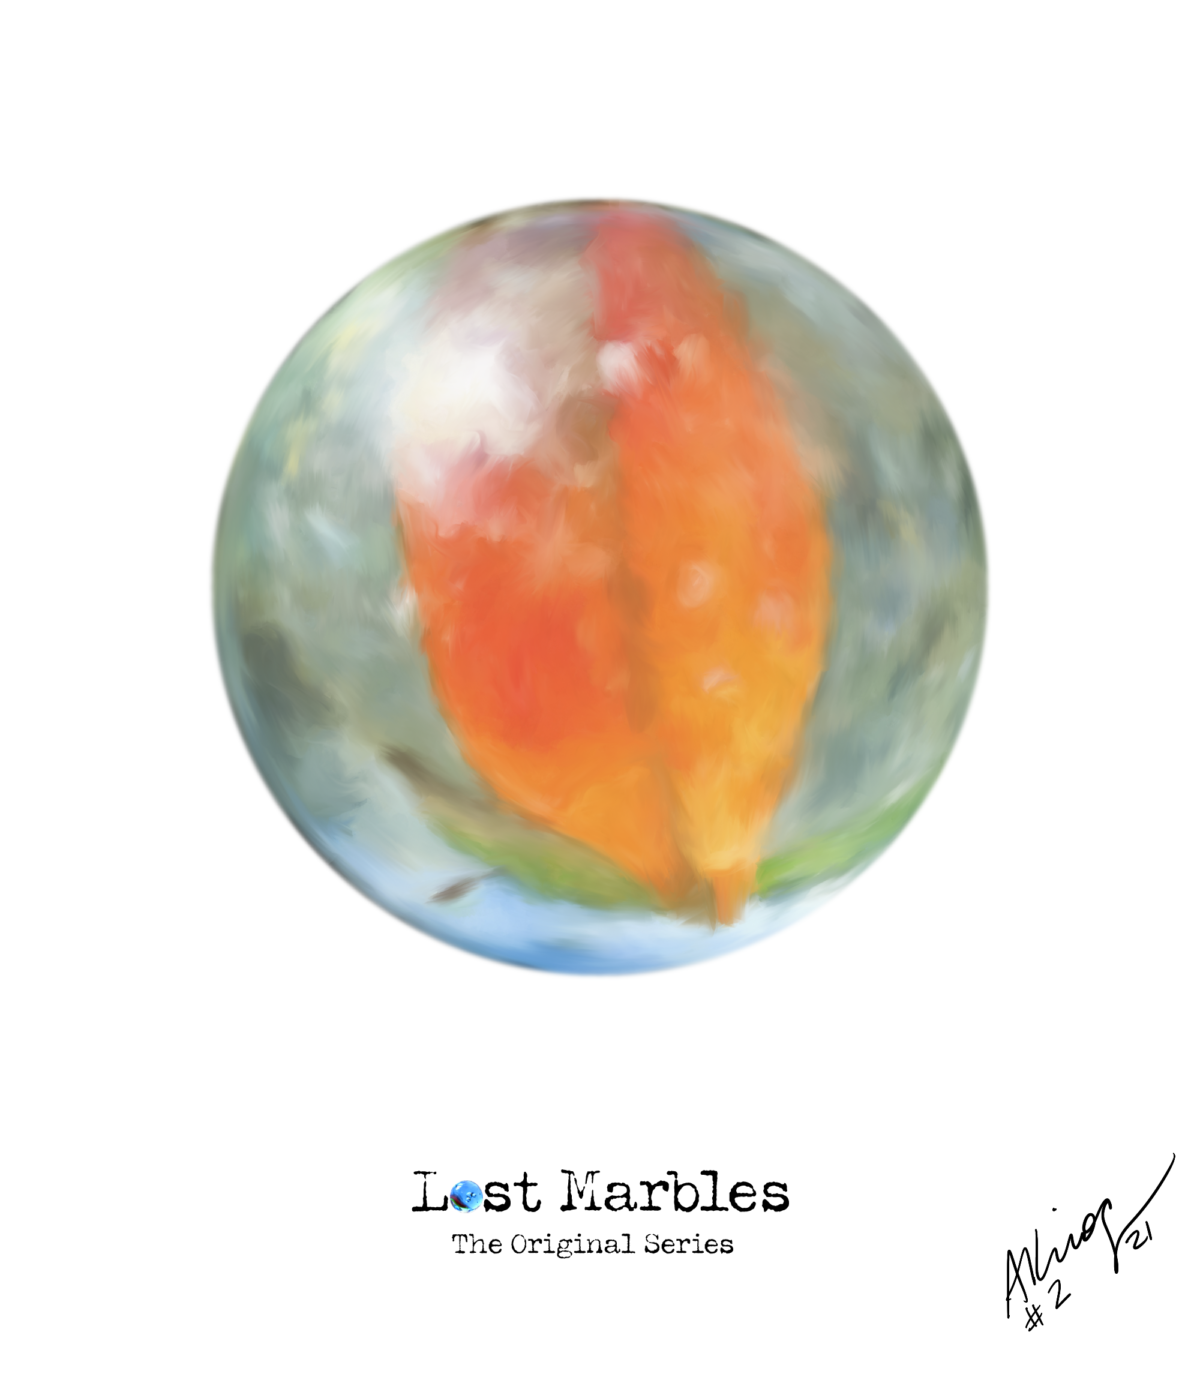 Lost Marbles #2 - NFT ID: #3047